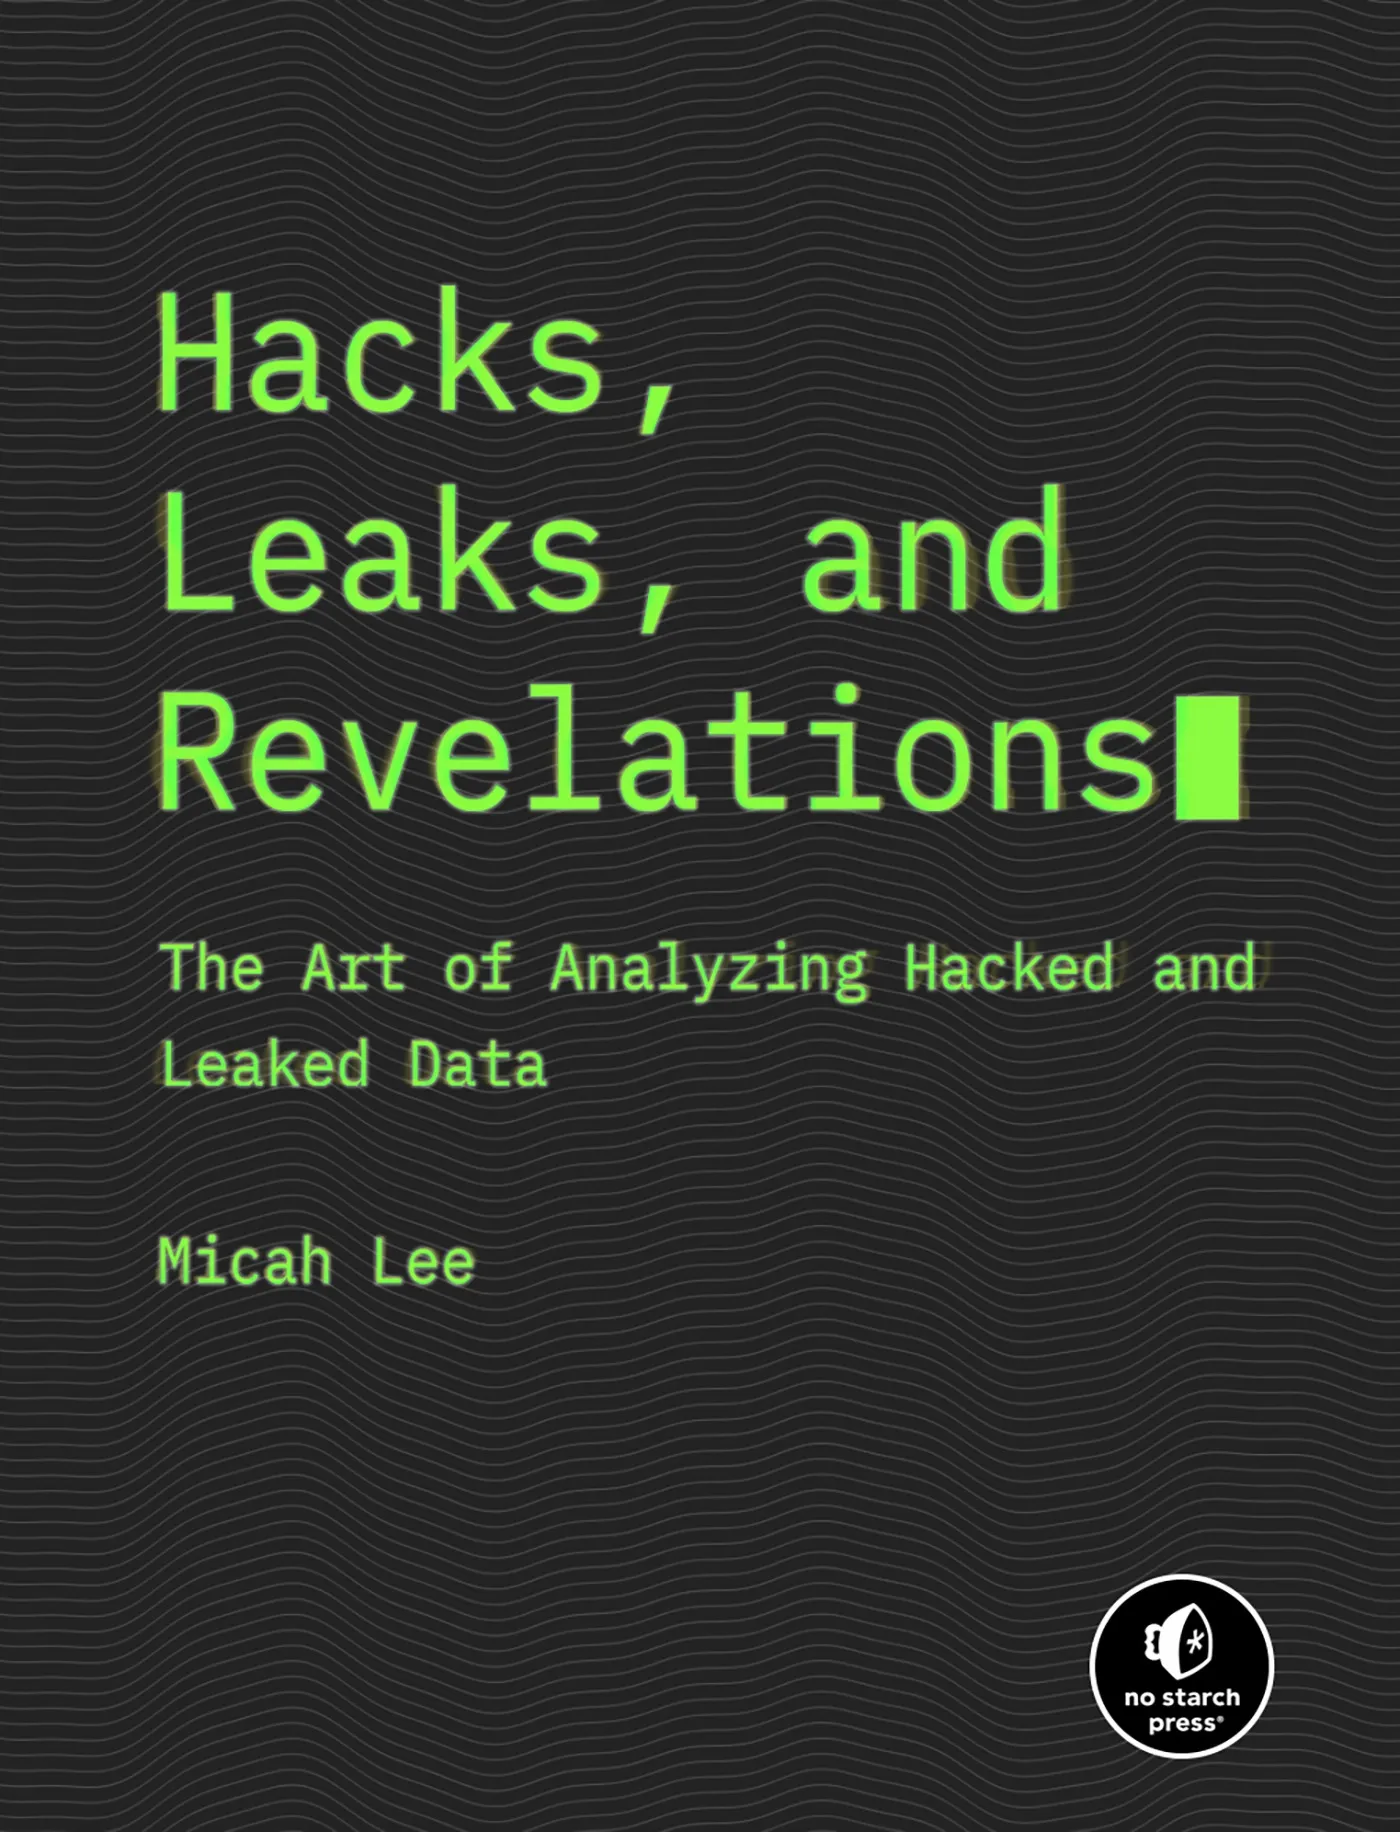 Cover of the book title Hacks, Leaks, and Revelations